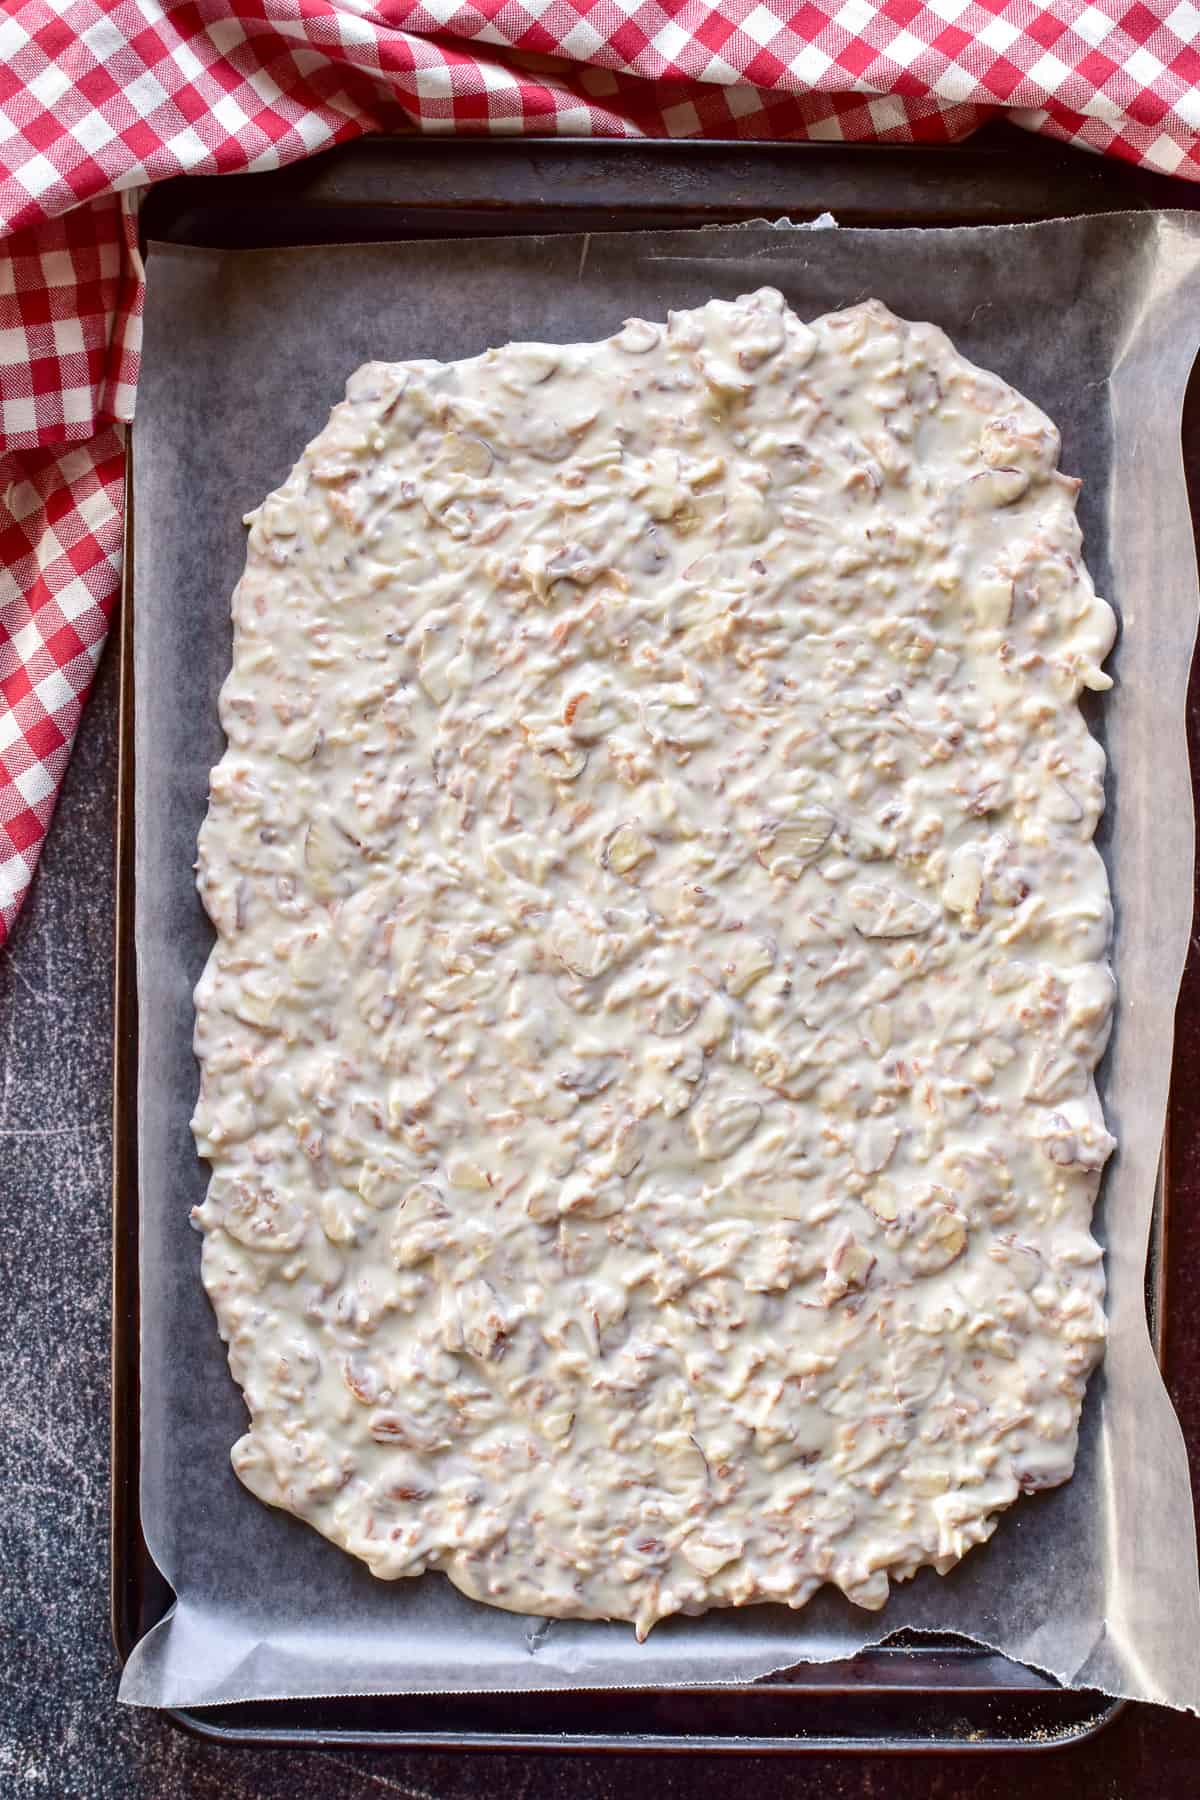 Toasted Coconut Bark spread out on pan lined with wax paper